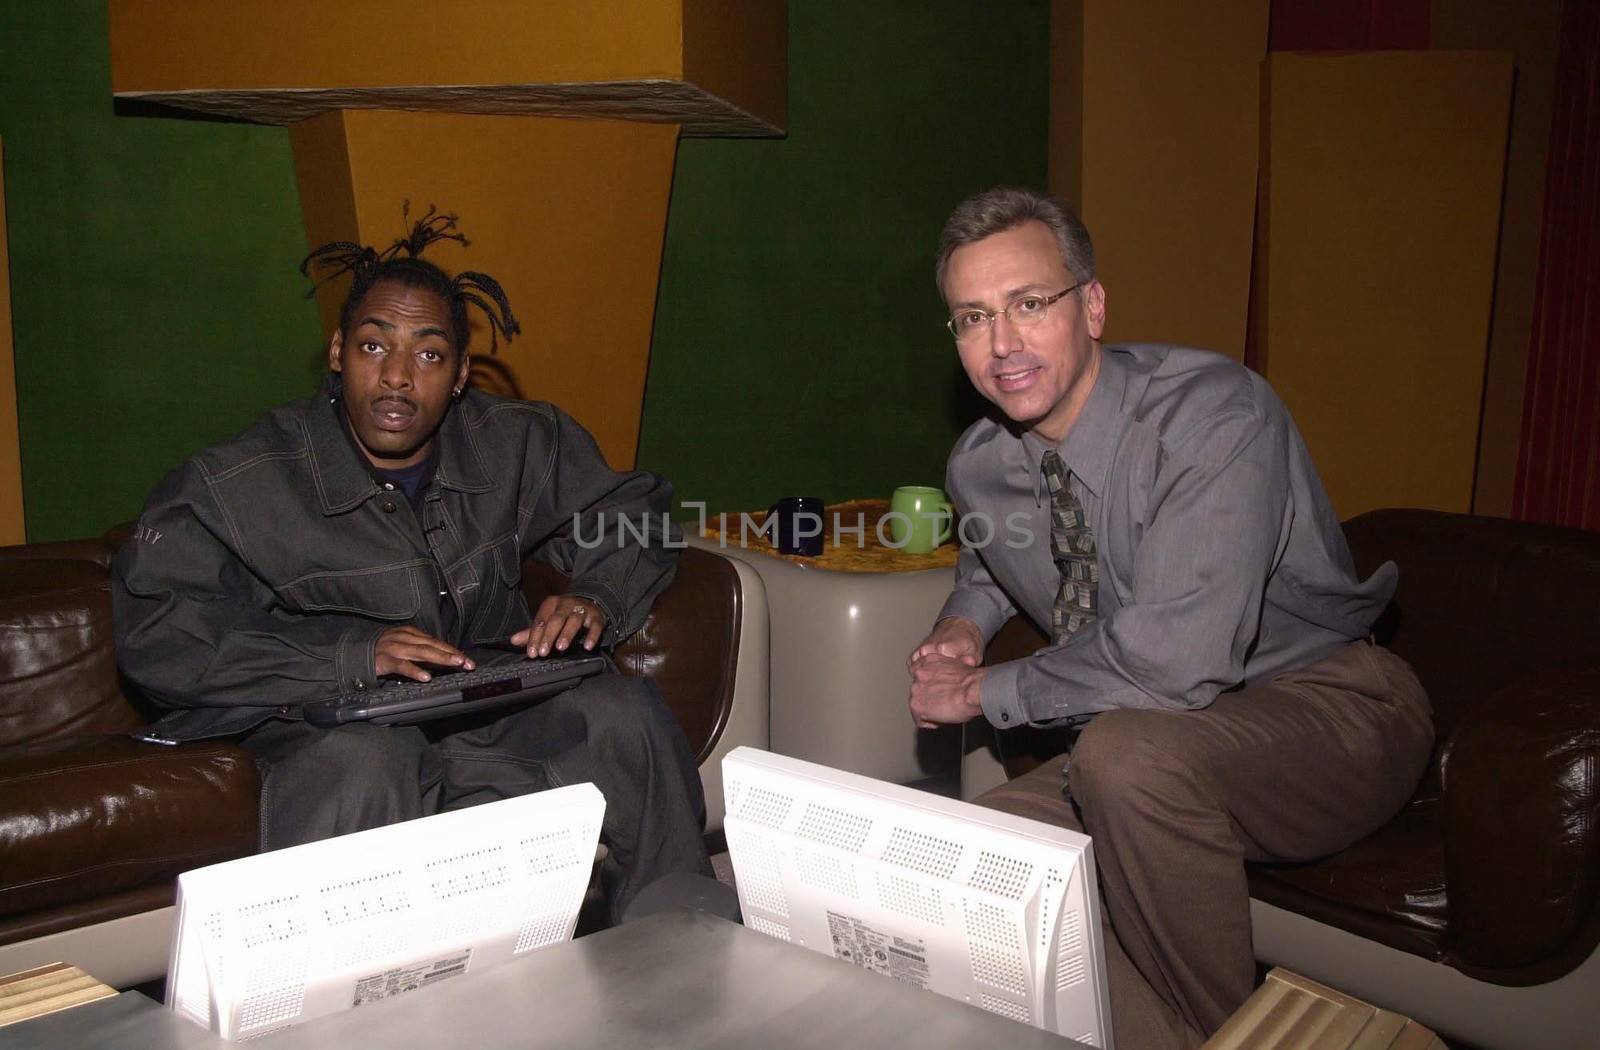 Coolio and Dr. Drew on the set of the Dr. Drew Show, Pasadena, 04-19-00